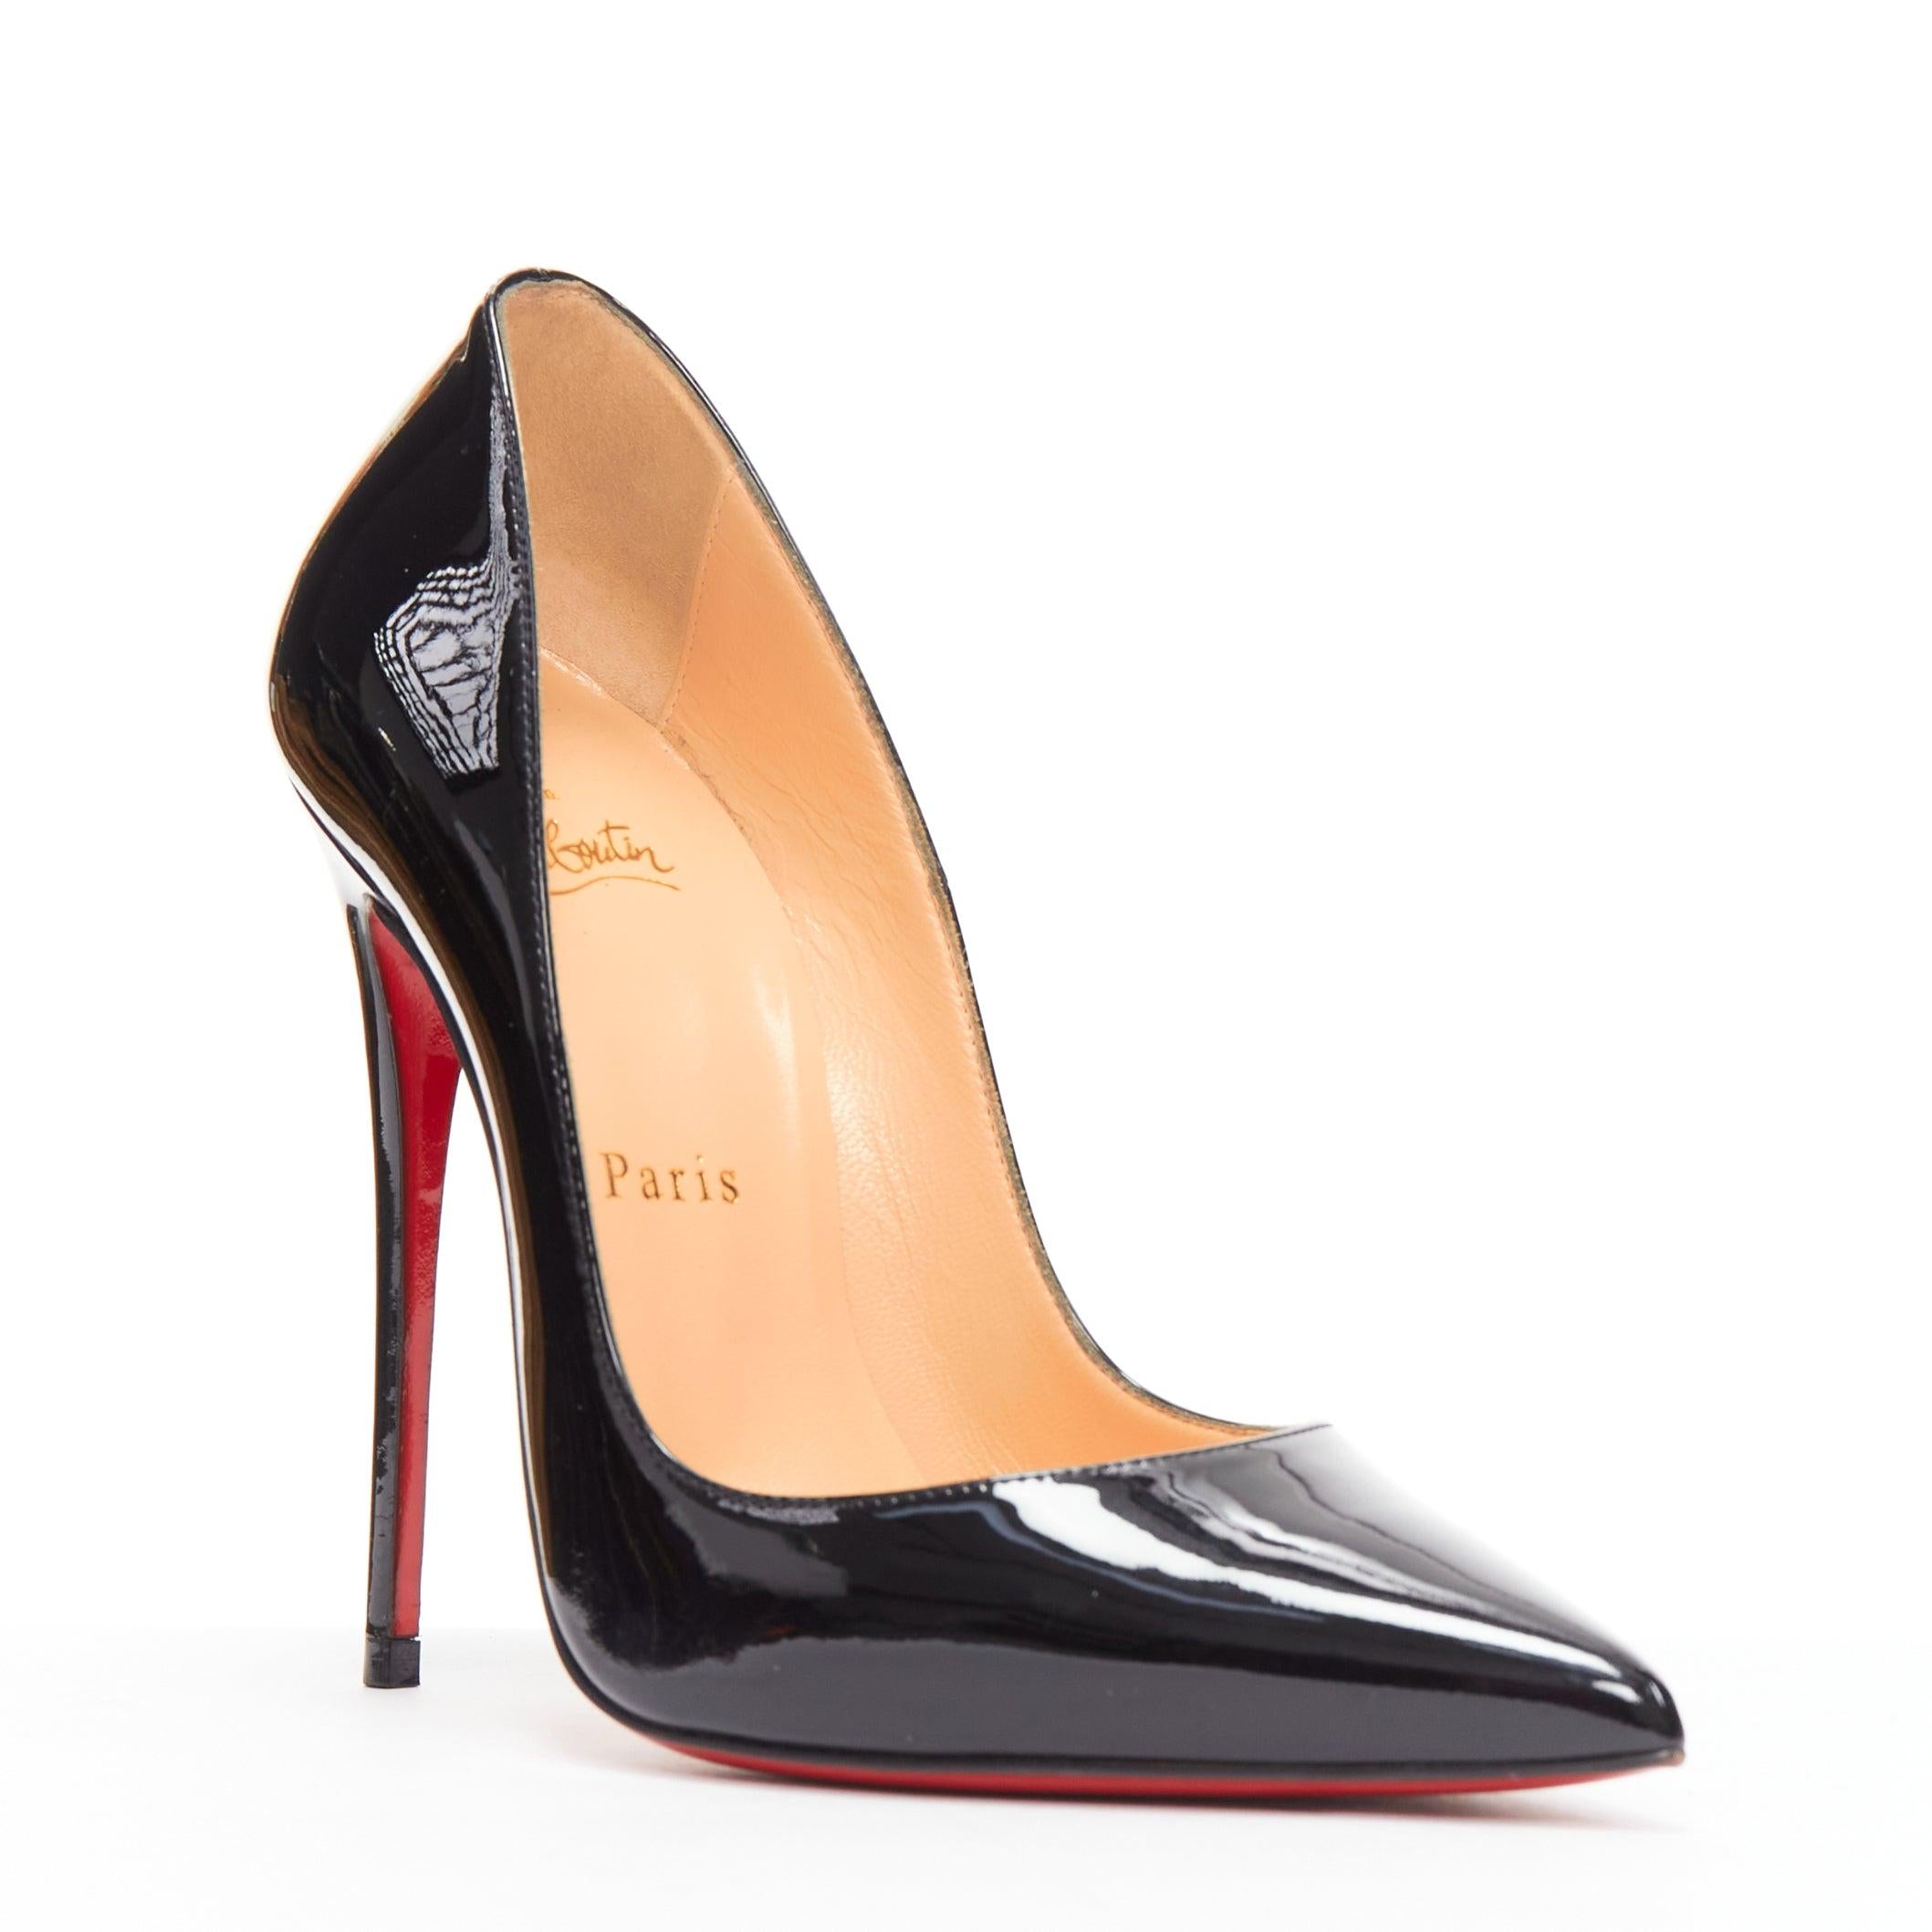 CHRISTIAN LOUBOUTIN So KAte 120 black patent leather point pigalle pump EU37
Reference: TGAS/D00961
Brand: Christian Louboutin
Model: So Kate 120
Material: Patent Leather
Color: Black
Pattern: Solid
Lining: Brown Leather
Extra Details: So Kate 120